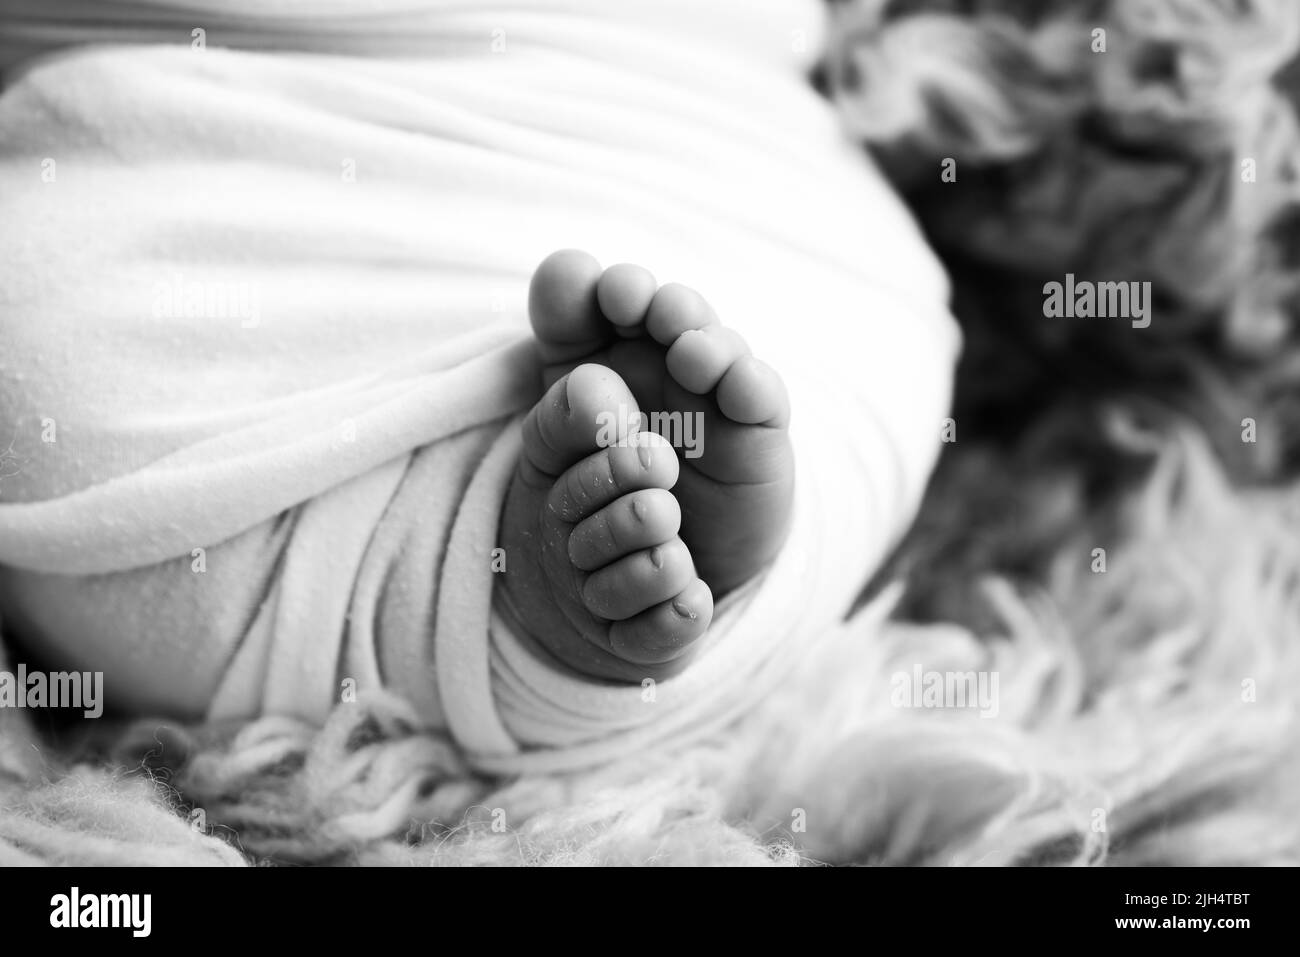 Close-up of toes, heels and feet of a baby.The tiny foot of a newborn. Baby feet covered with isolated background. Stock Photo